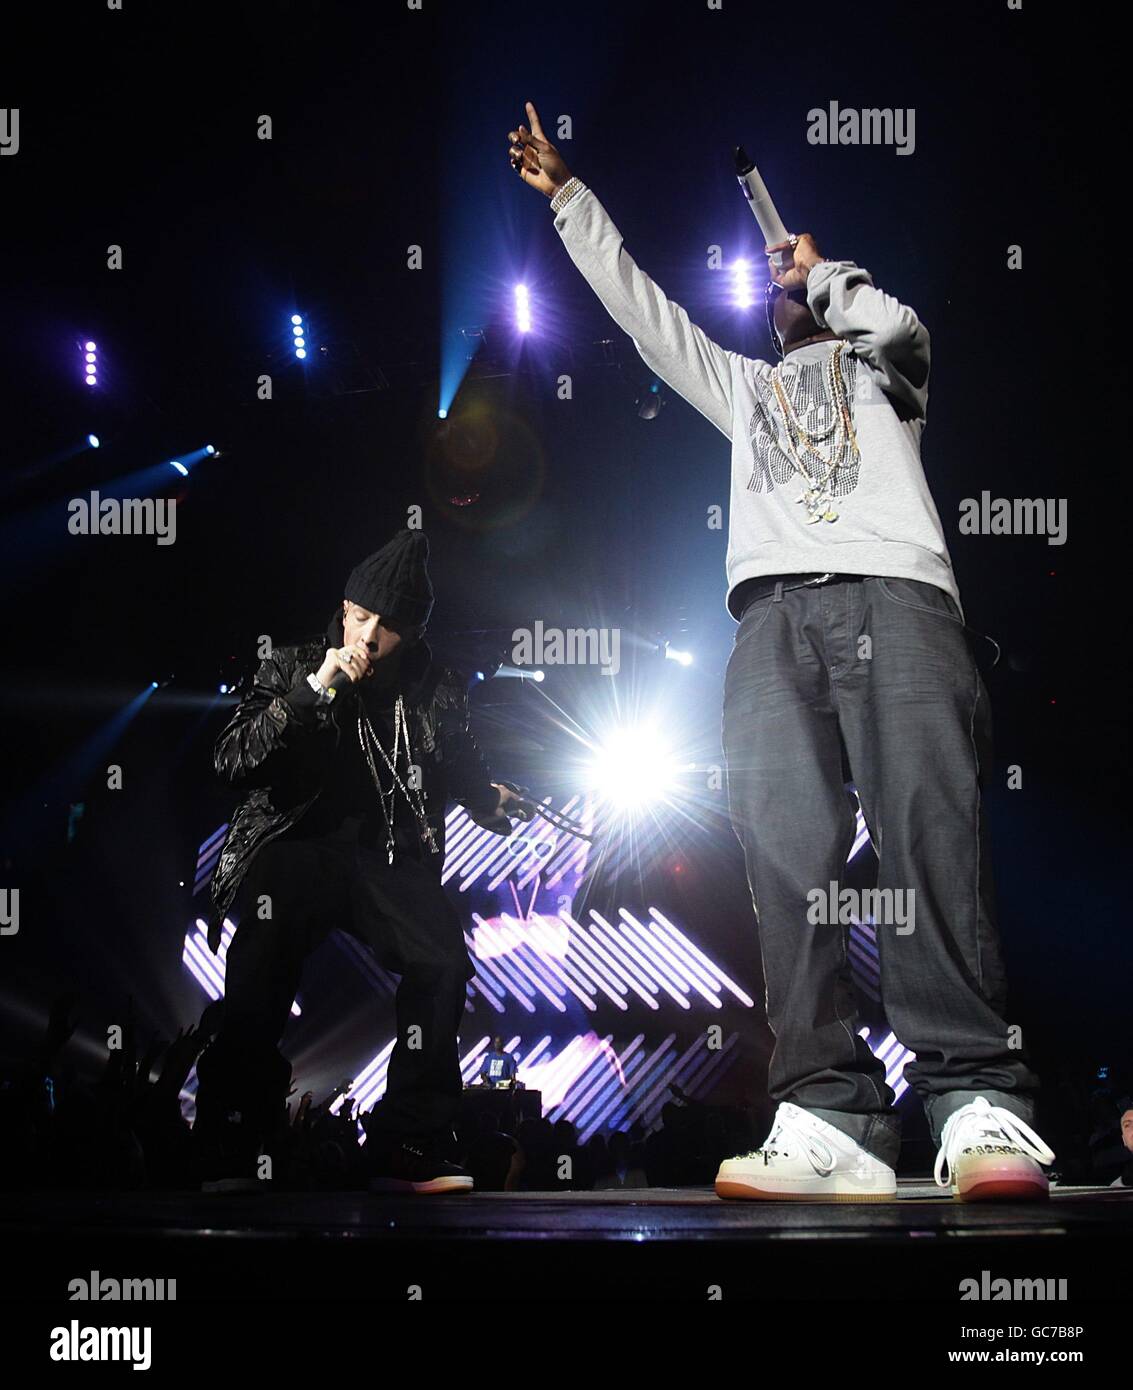 Capital FM's Jingle Bell Ball - Day One - Show - London. Tinchy Stryder on stage with Dappy from N-Dubz at the Capital FM's Jingle Bell Ball at the O2 Arena in London. Stock Photo